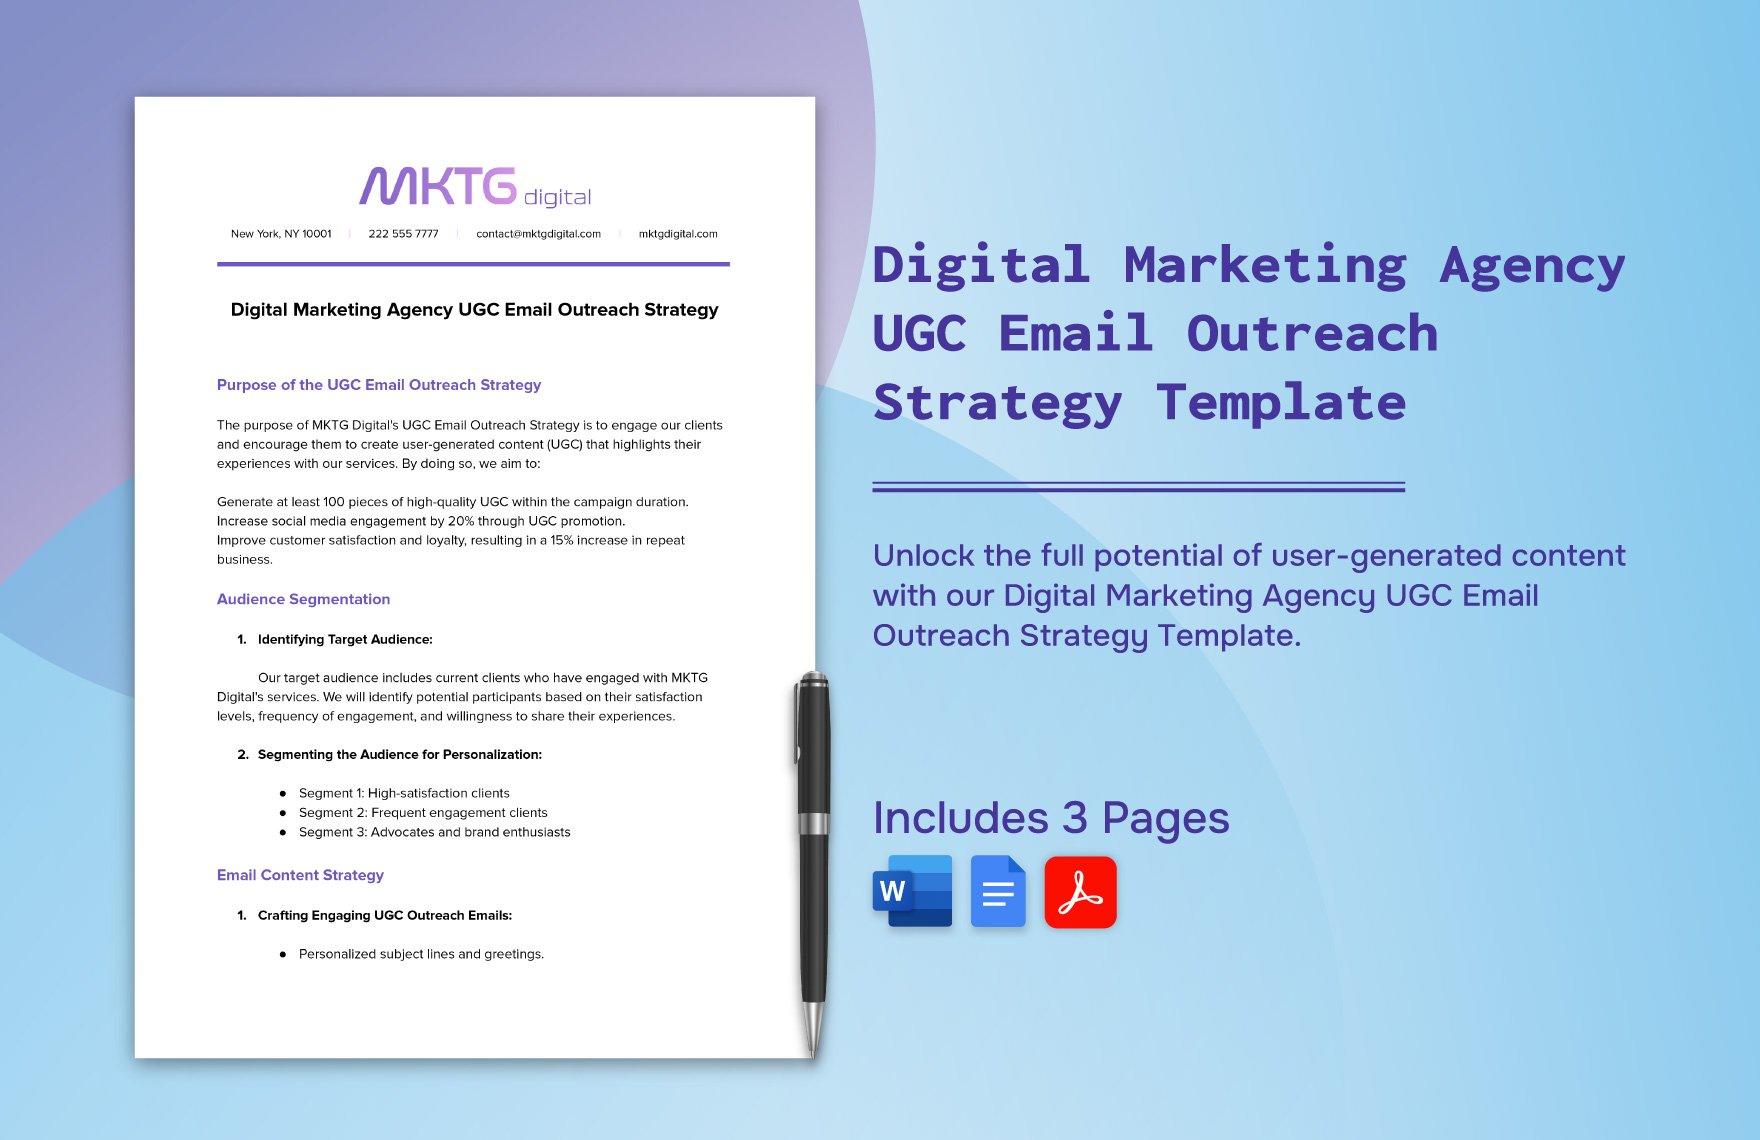 Digital Marketing Agency UGC Email Outreach Strategy Template